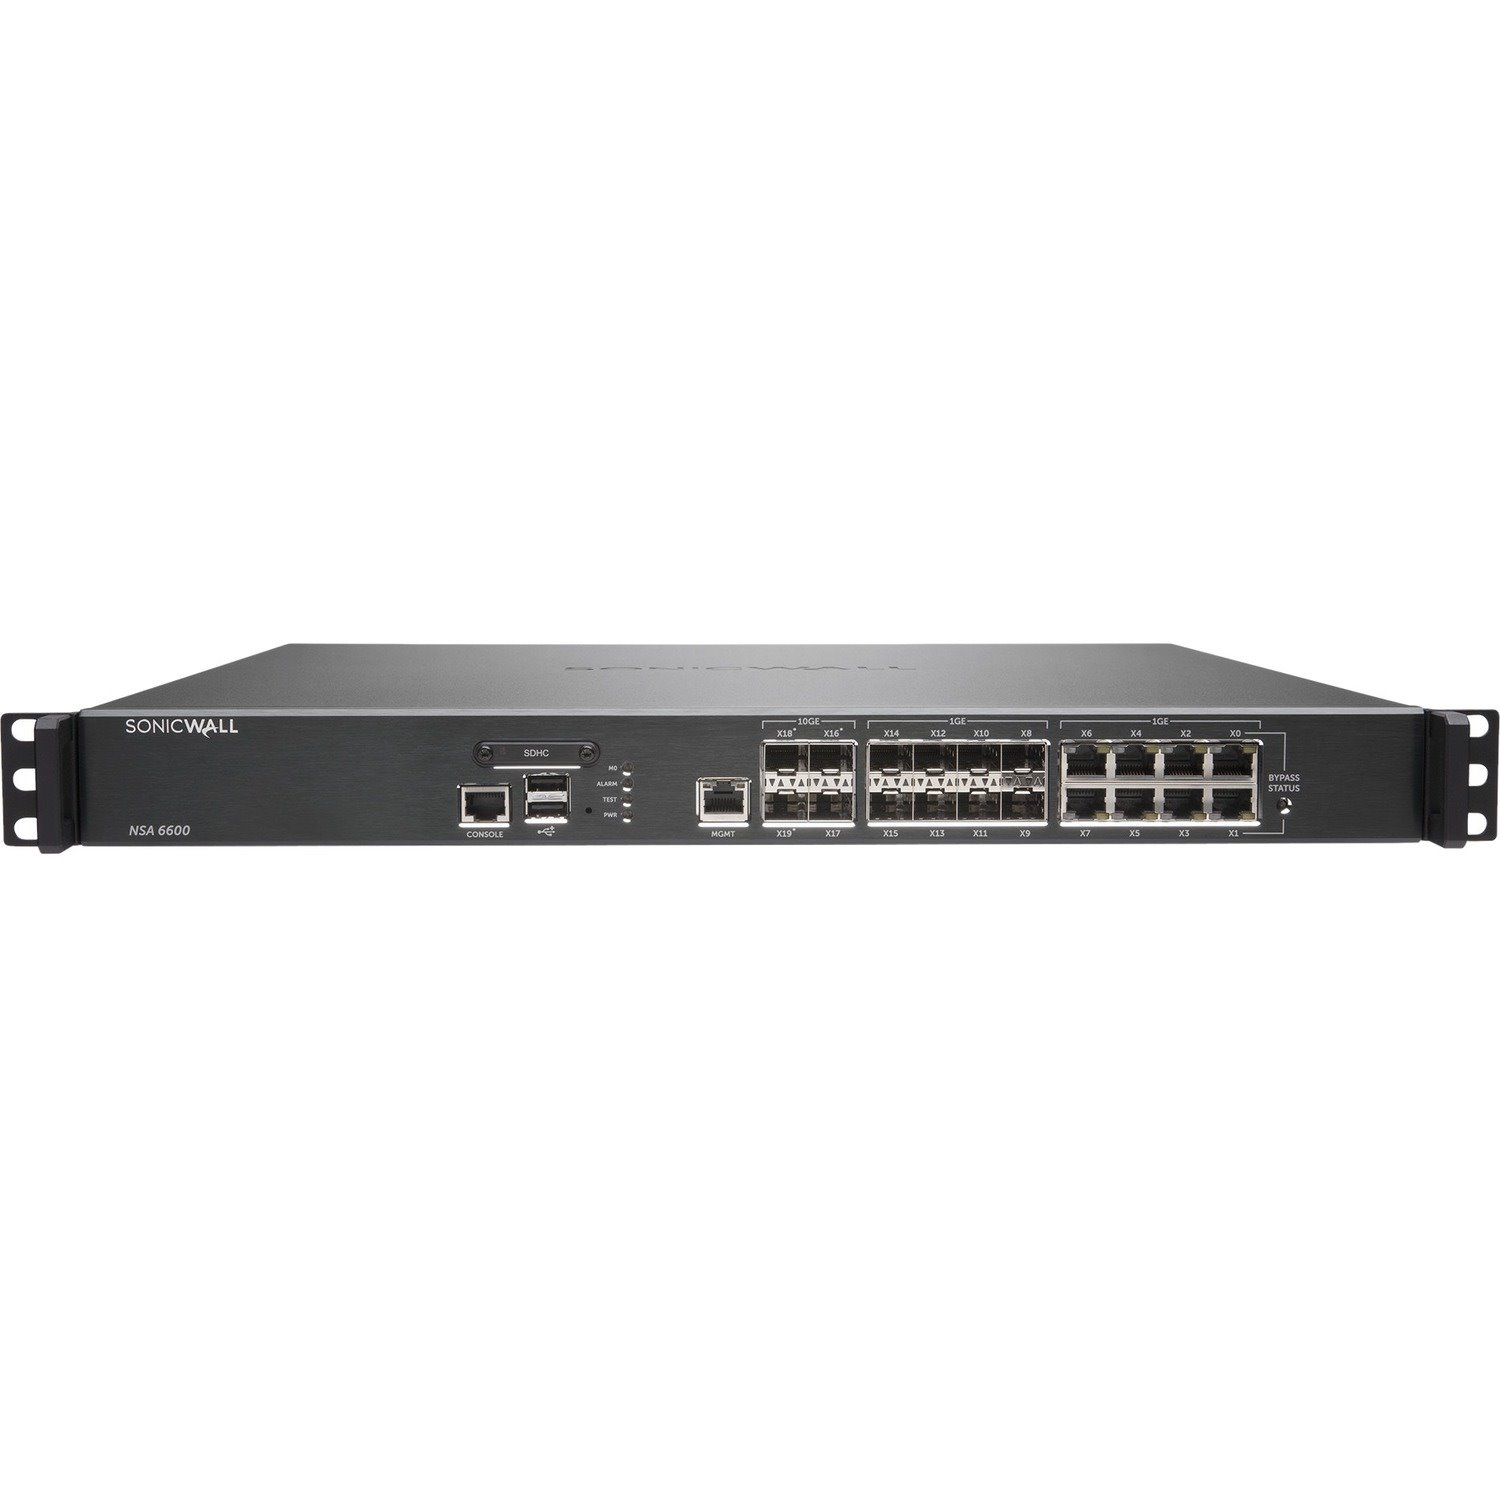 SonicWall 6600 Network Security/Firewall Appliance